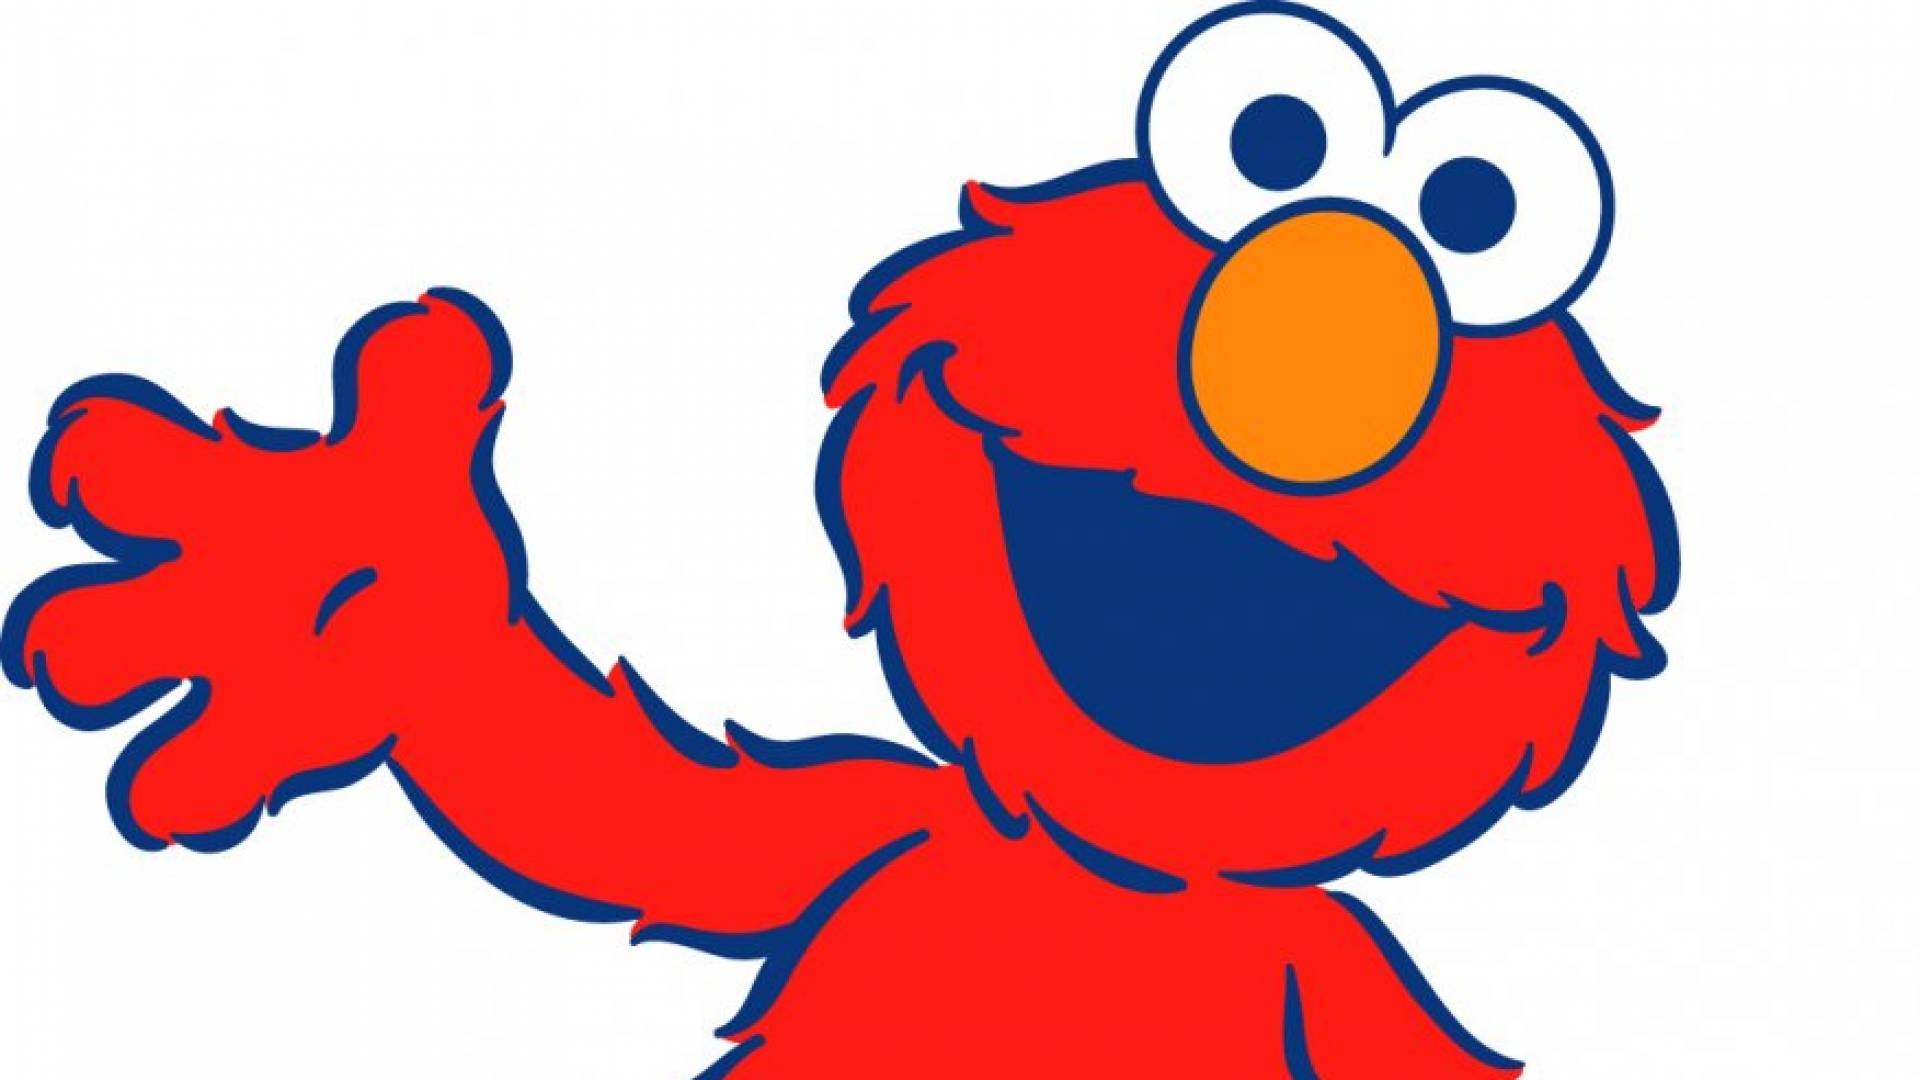 Elmo, Cheerful wallpapers, Cute character, Vibrant backgrounds, 1920x1080 Full HD Desktop